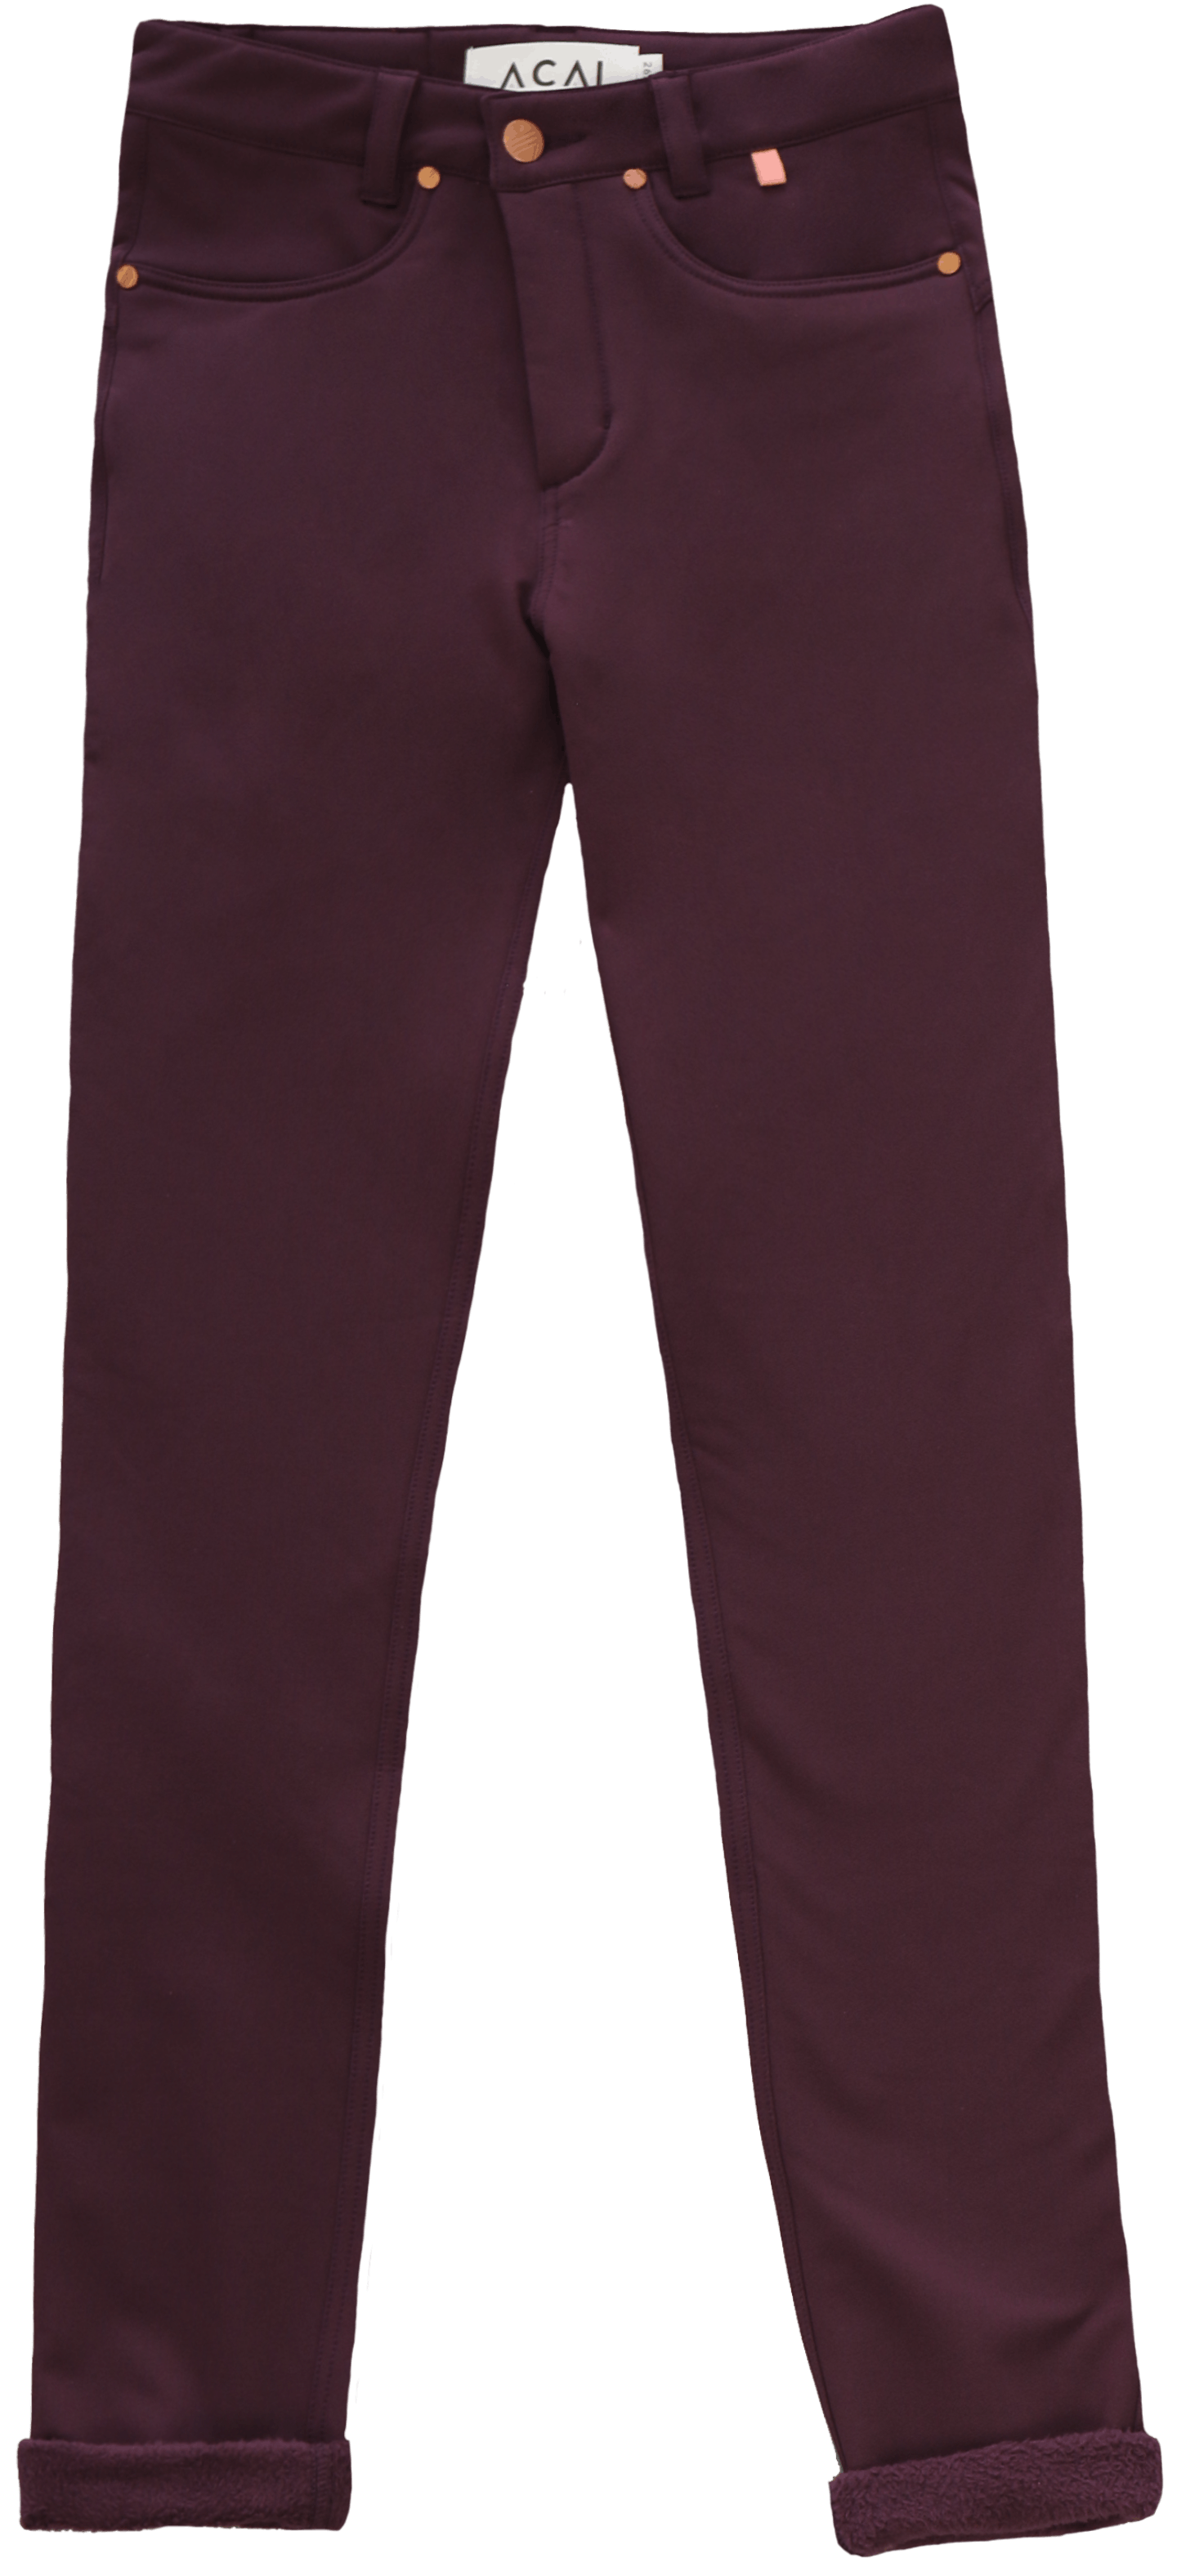 Aubergine Thermal Skinny Outdoor Trousers, £84